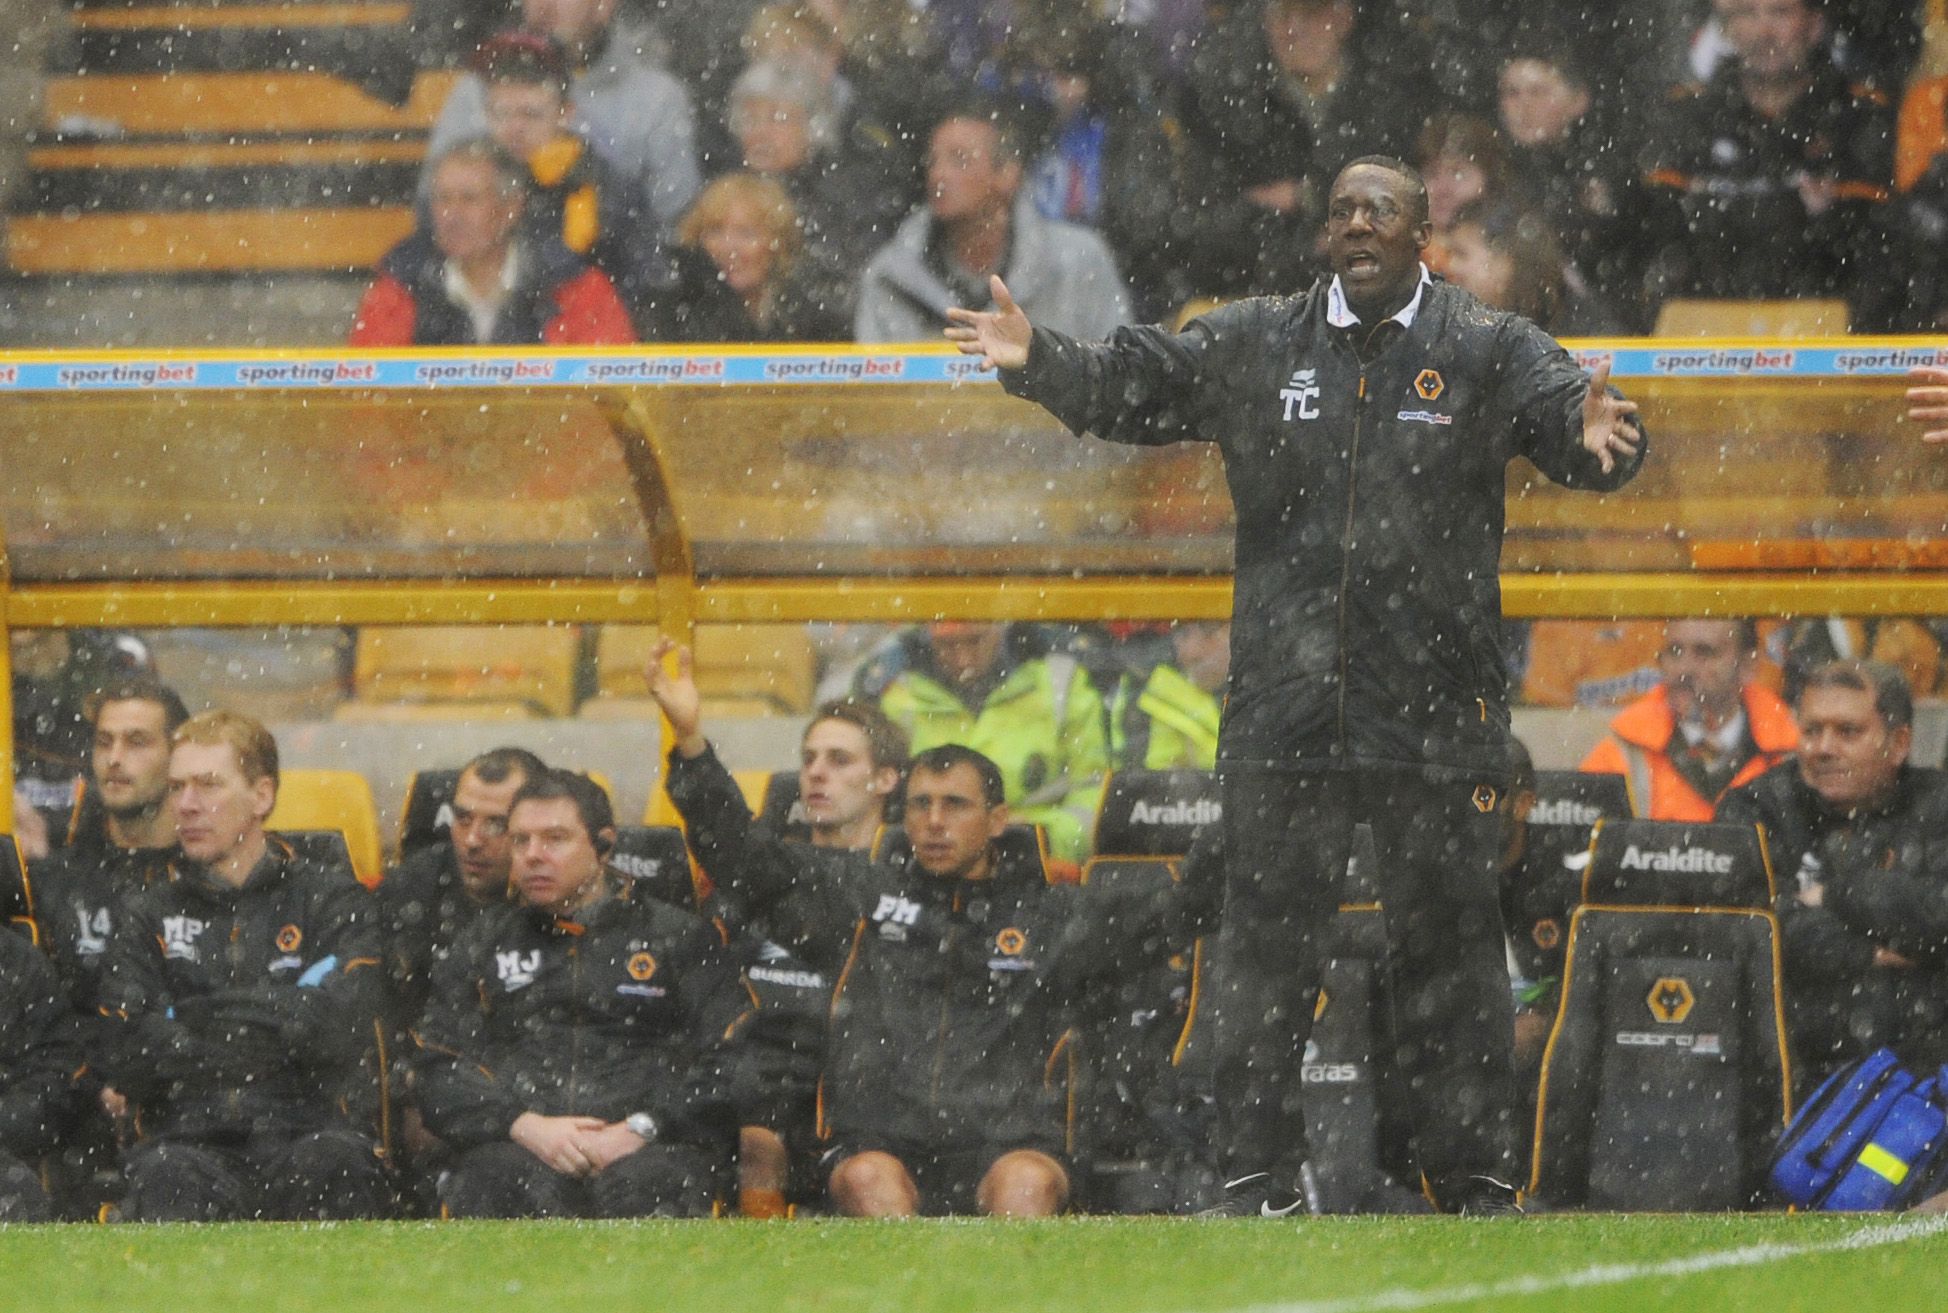 Football - Wolverhampton Wanderers v Manchester City Barclays Premier League  - Molineux - 22/4/12 
Wolves' manager  Terry Connor 
Mandatory Credit: Action Images / Tony O'Brien 
Livepic 
EDITORIAL USE ONLY. No use with unauthorized audio, video, data, fixture lists, club/league logos or live services. Online in-match use limited to 45 images, no video emulation. No use in betting, games or single club/league/player publications.  Please contact your account representative for further details.